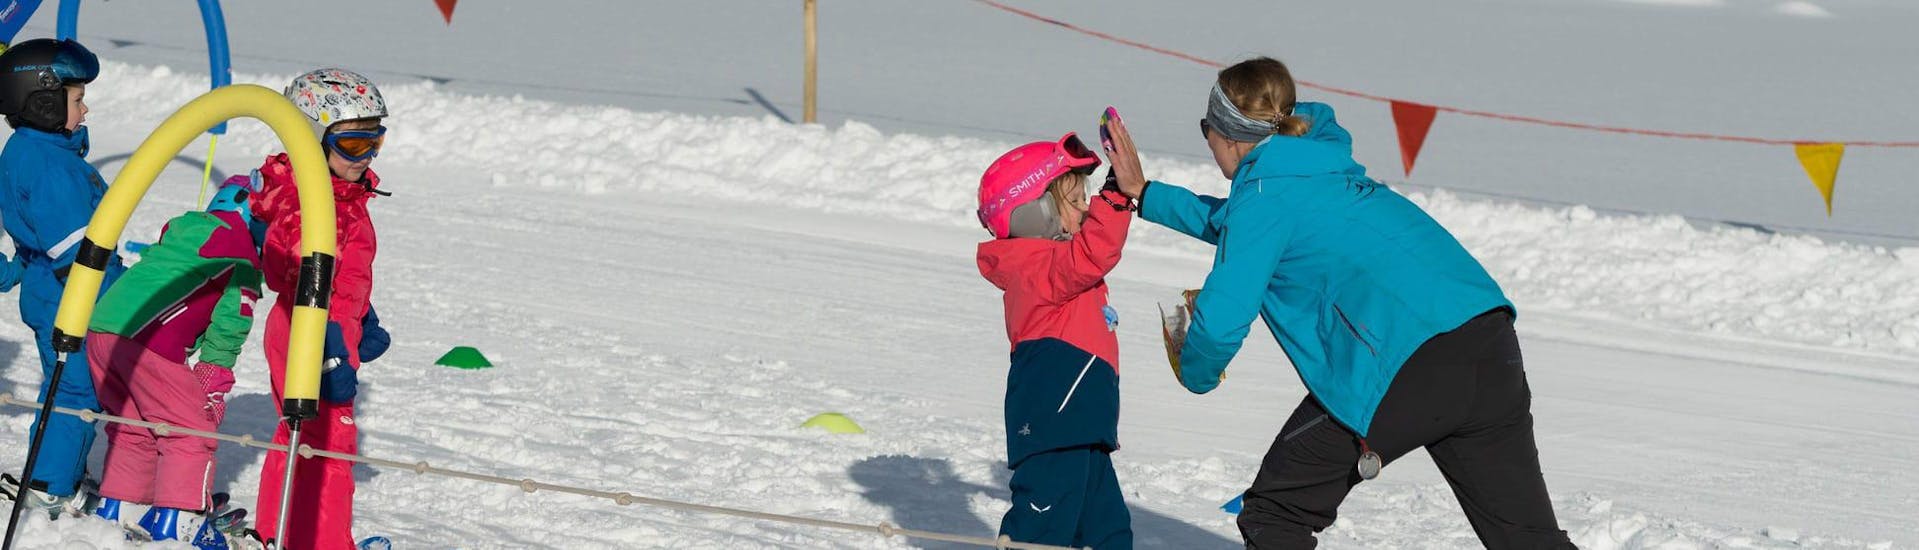 Ski Instructor Private for Kids - All Ages.